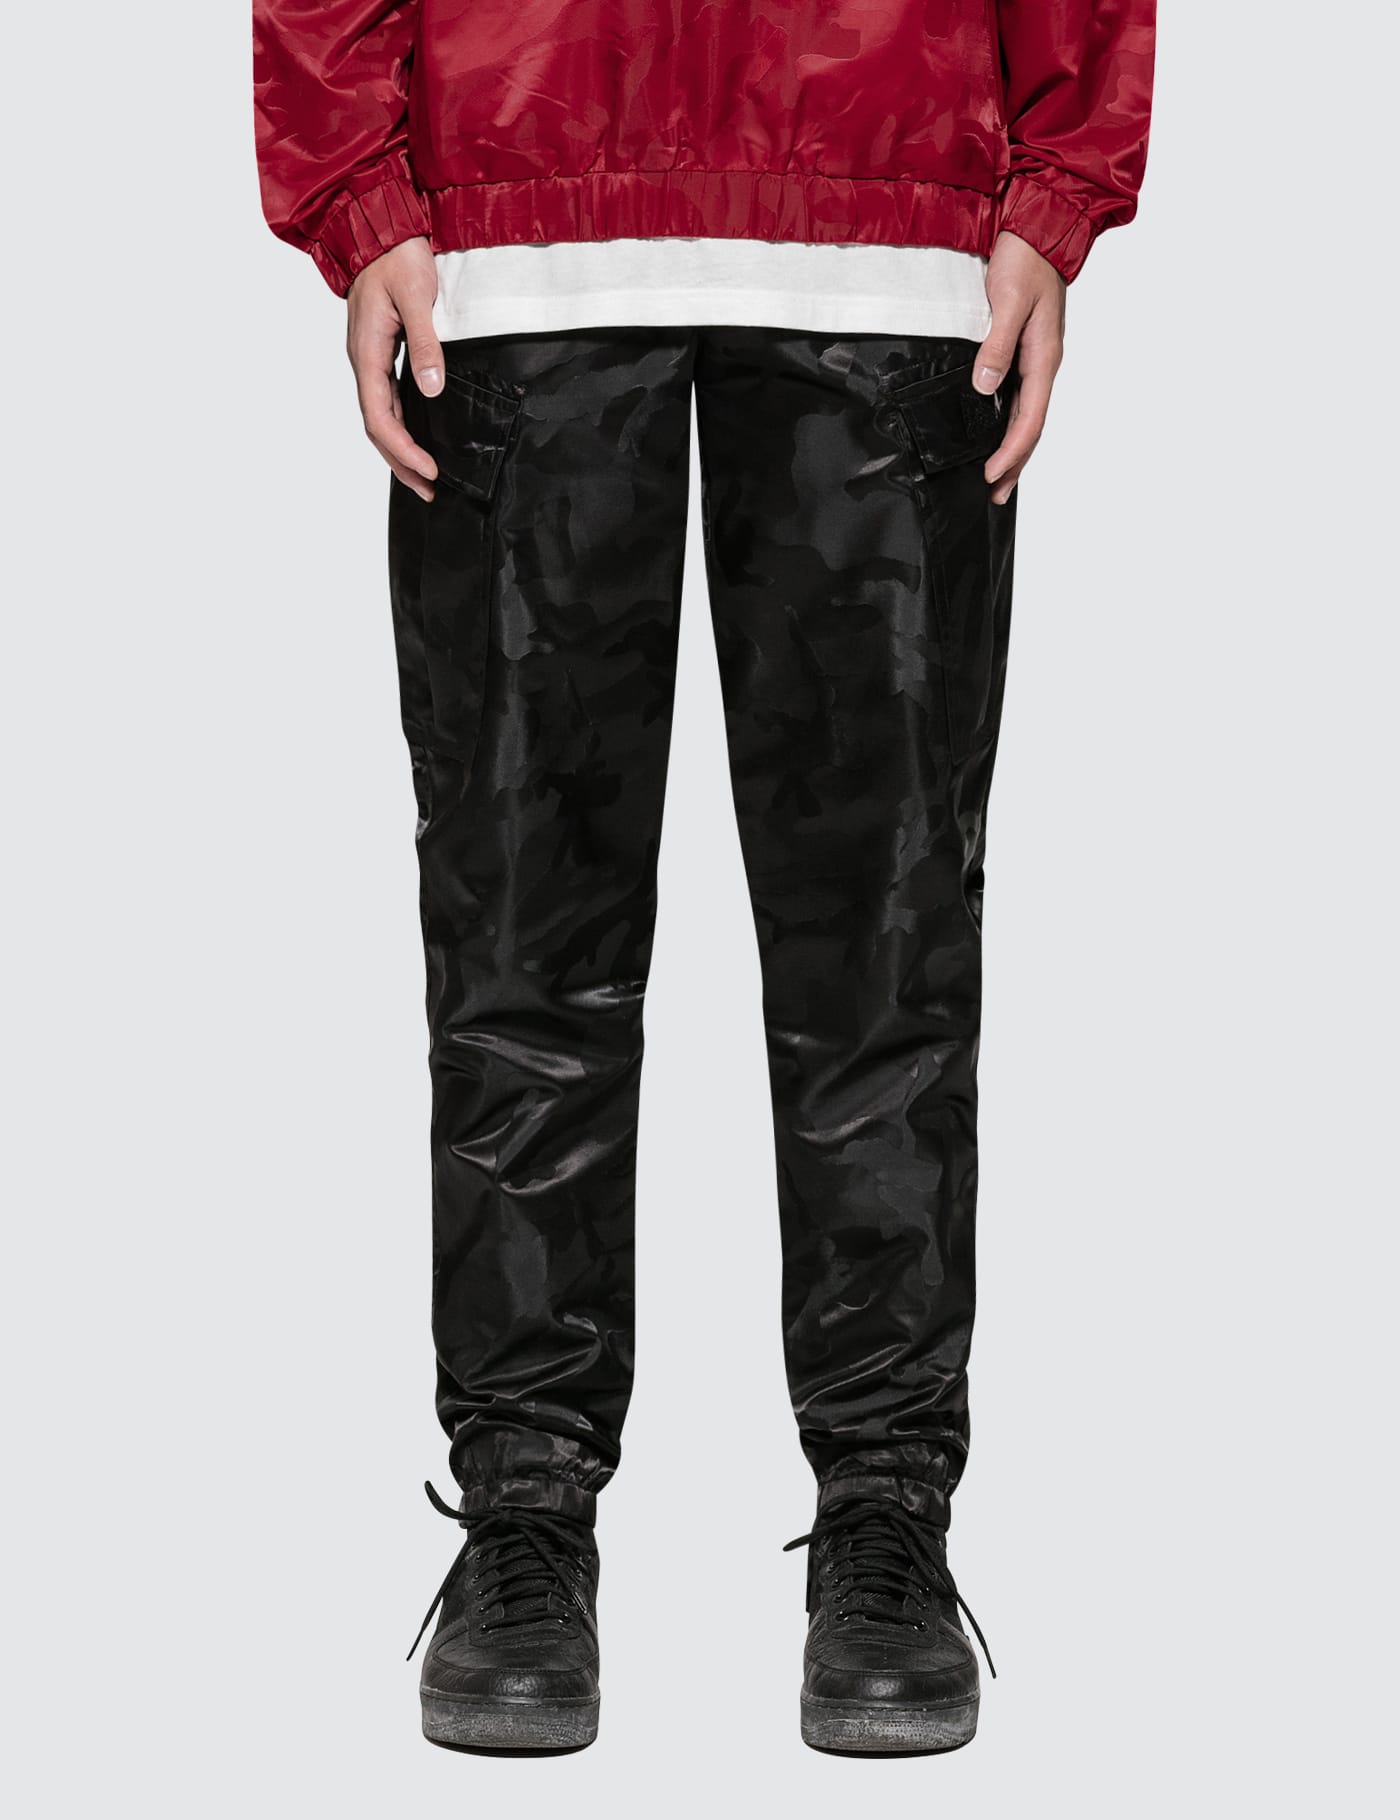 M+RC Noir - HMU Cargo Pant | HBX - Globally Curated Fashion and 